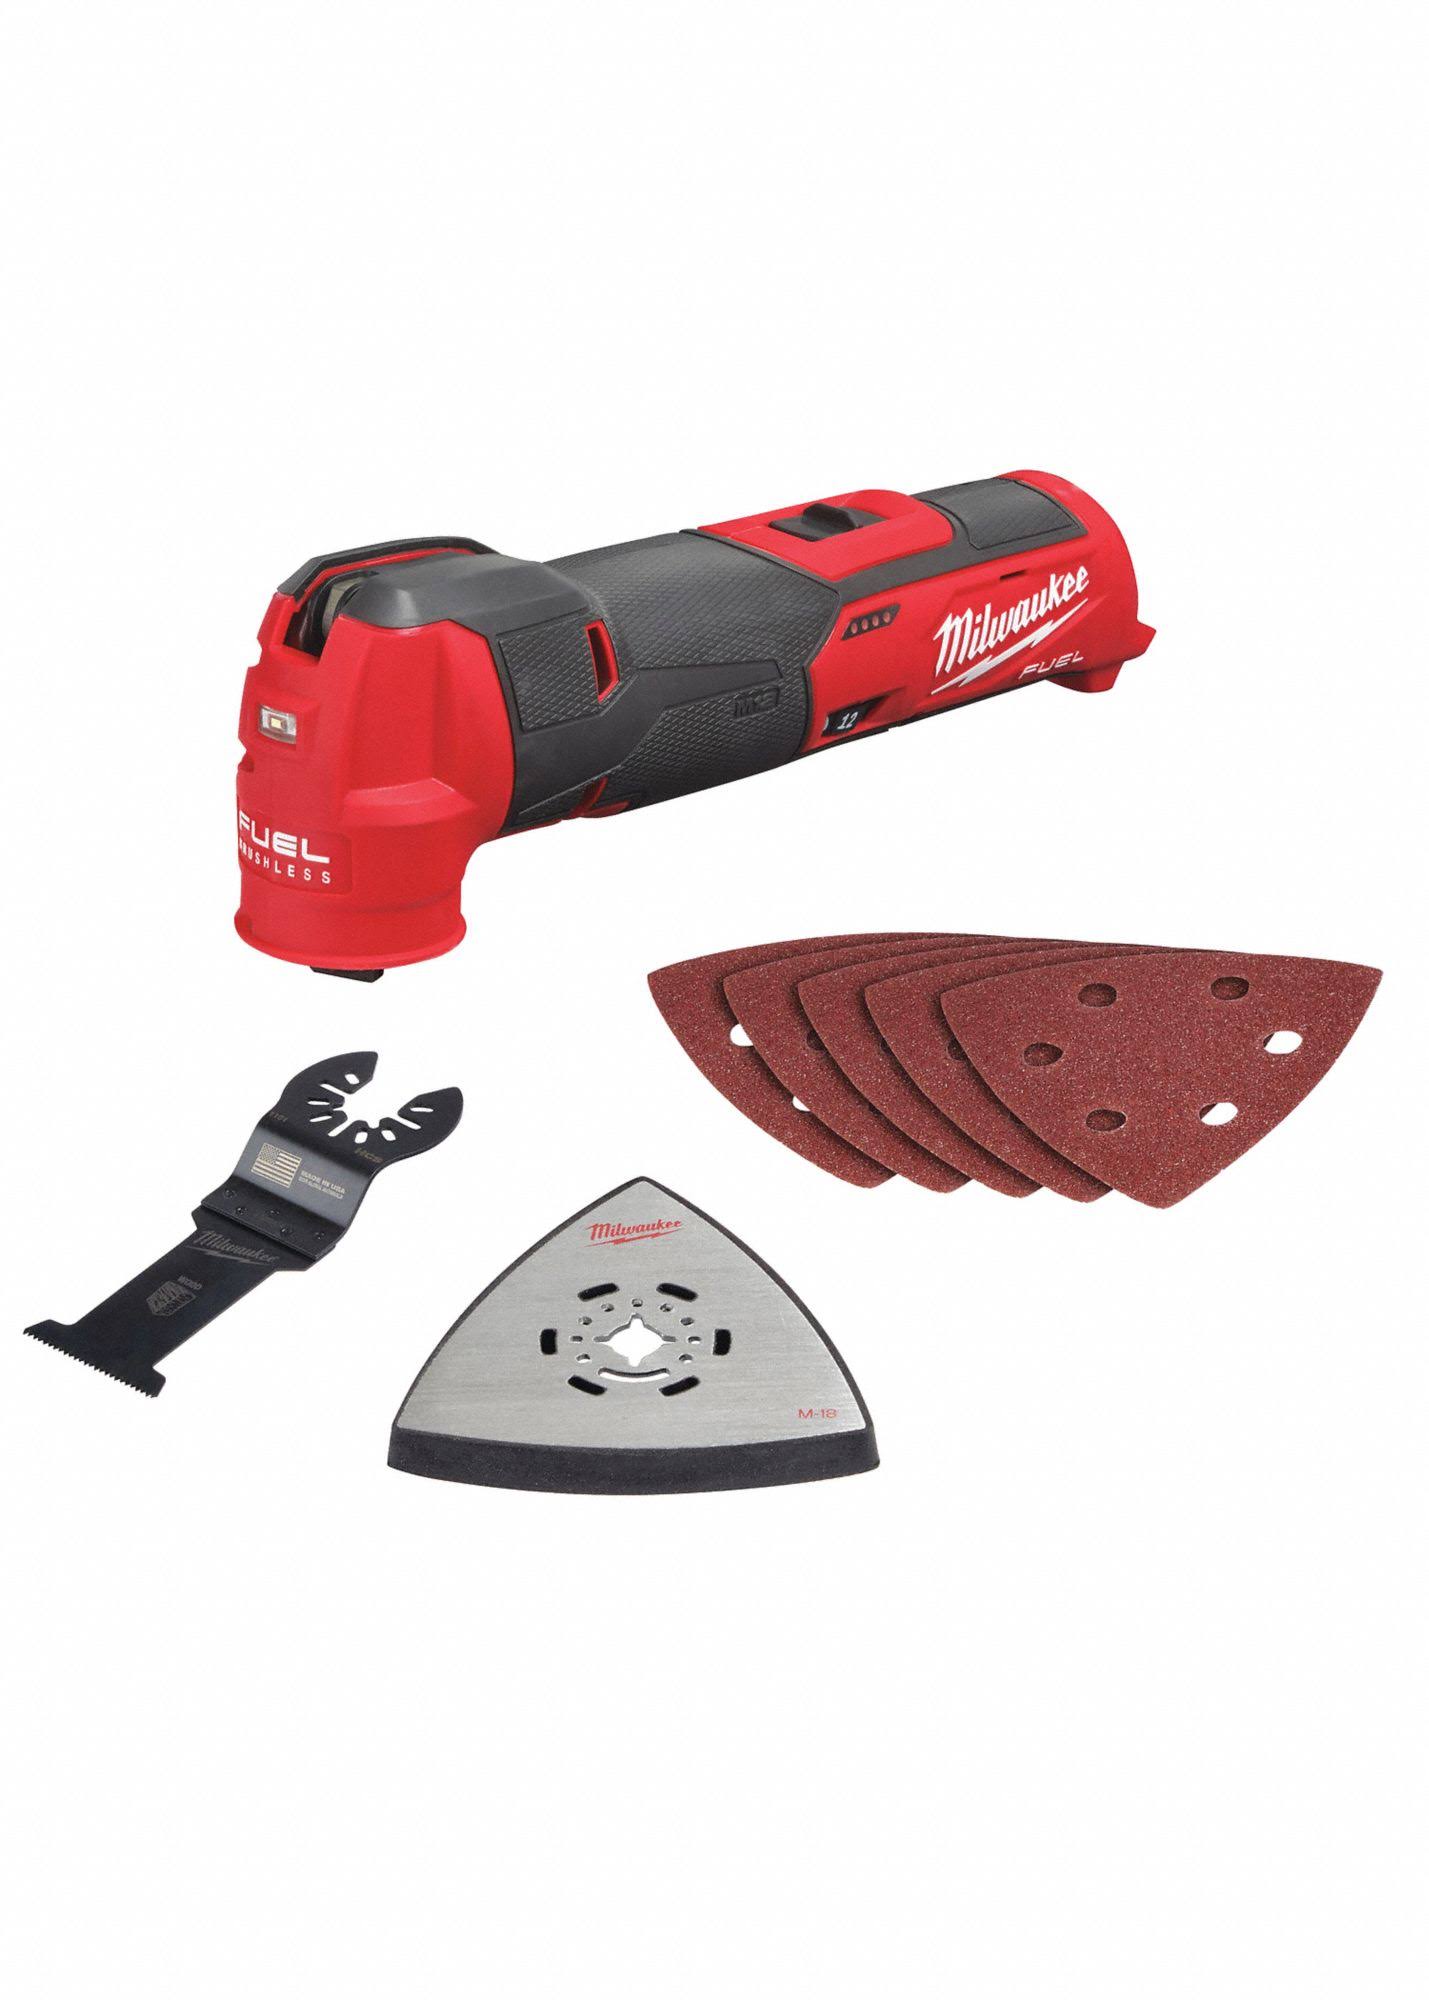 M12 Fuel 12-Volt Lithium-Ion Cordless Oscillating Multi-Tool (Tool-Only)